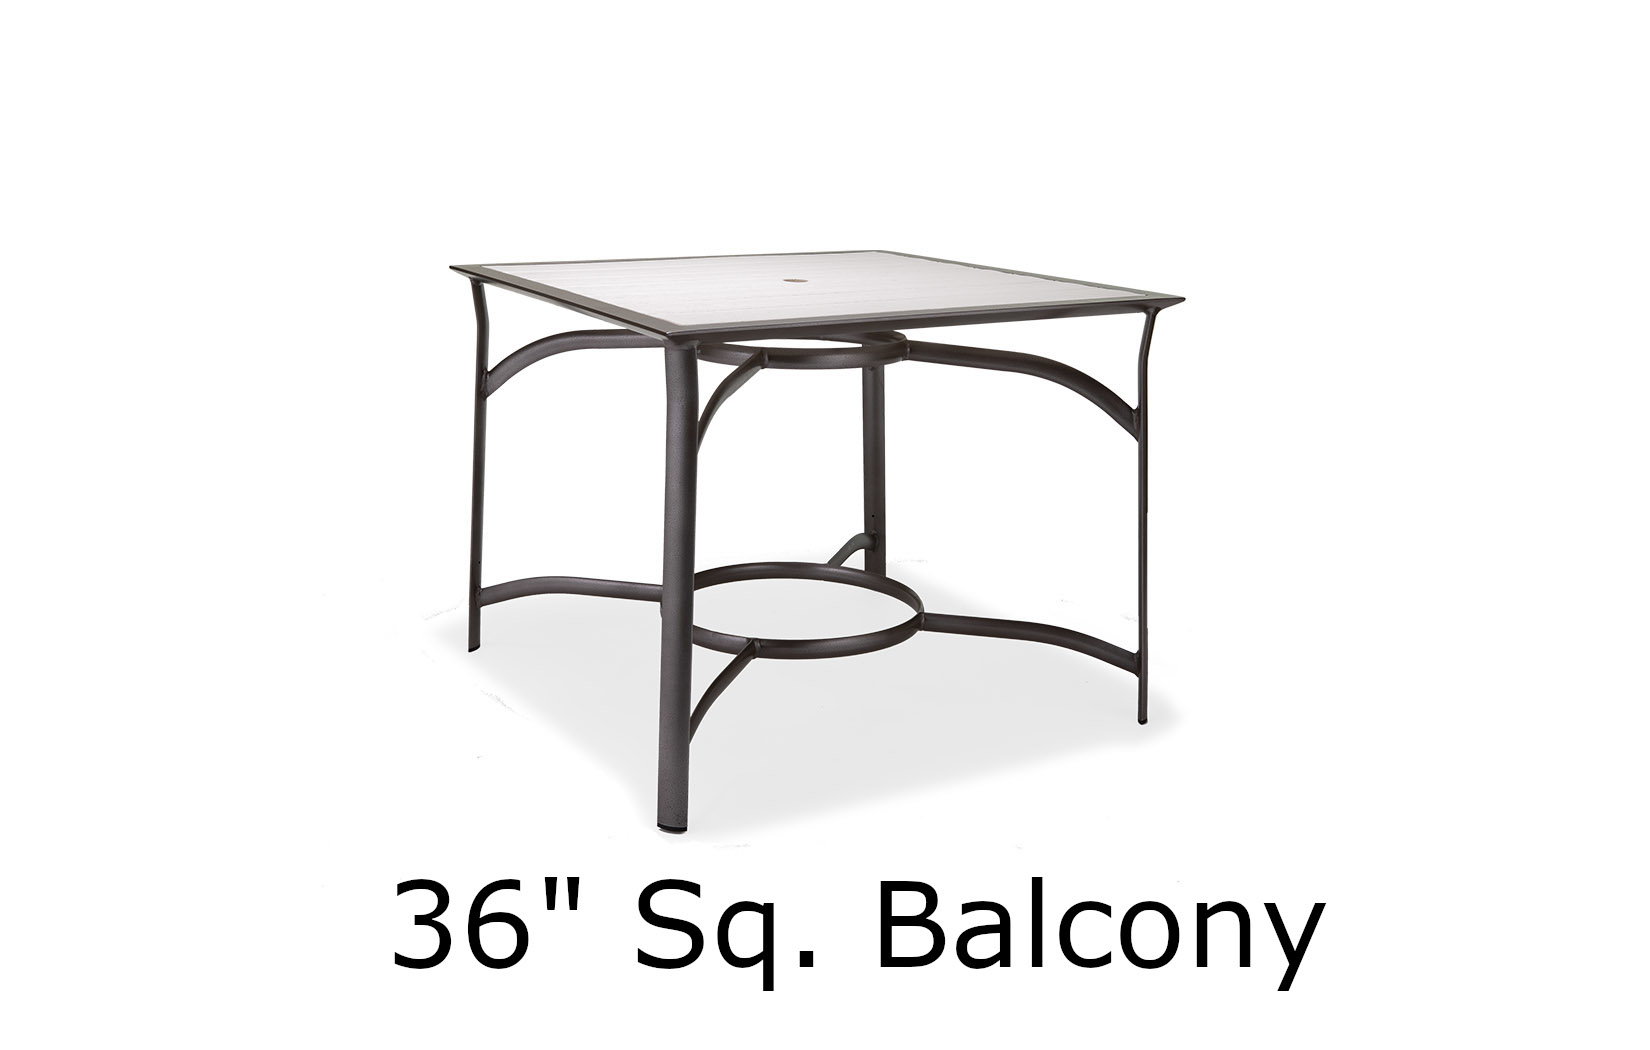 Seascape Collection 36 Inch Square Balcony Height Table